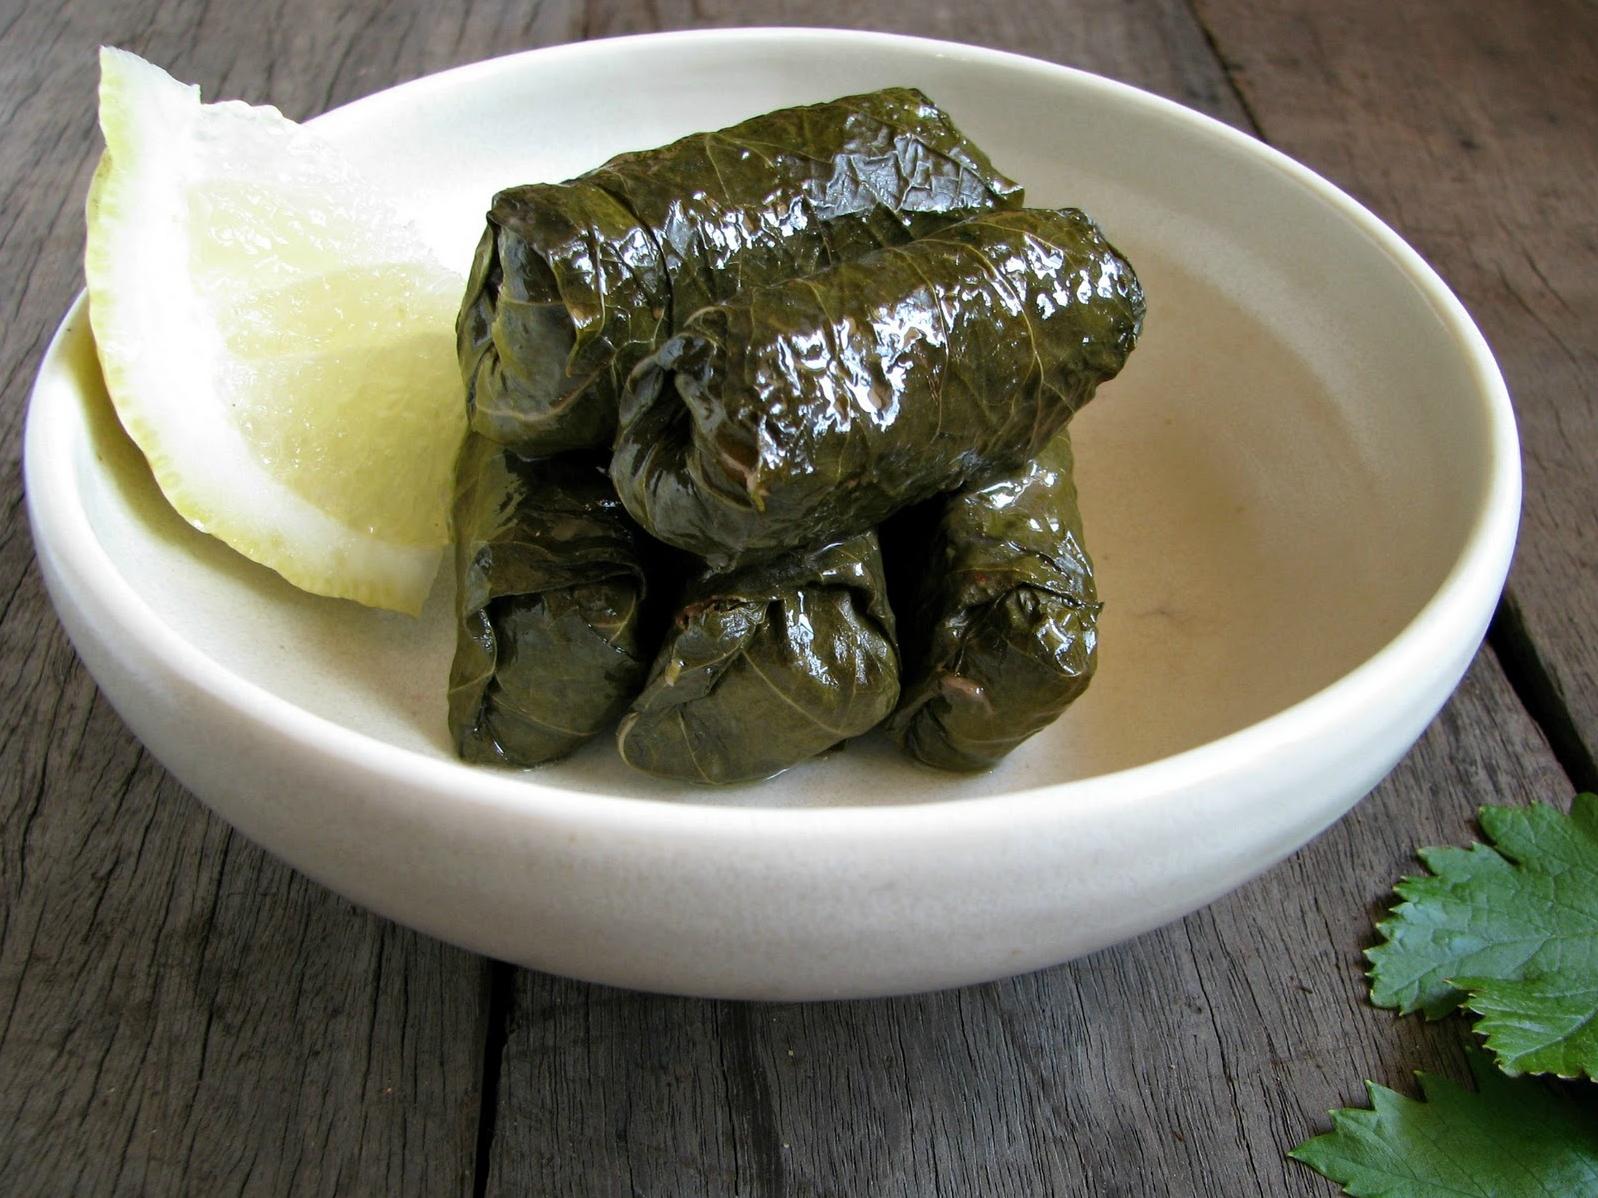  Don't wait for your next Greek vacation to enjoy some mouth-watering Dolmades!